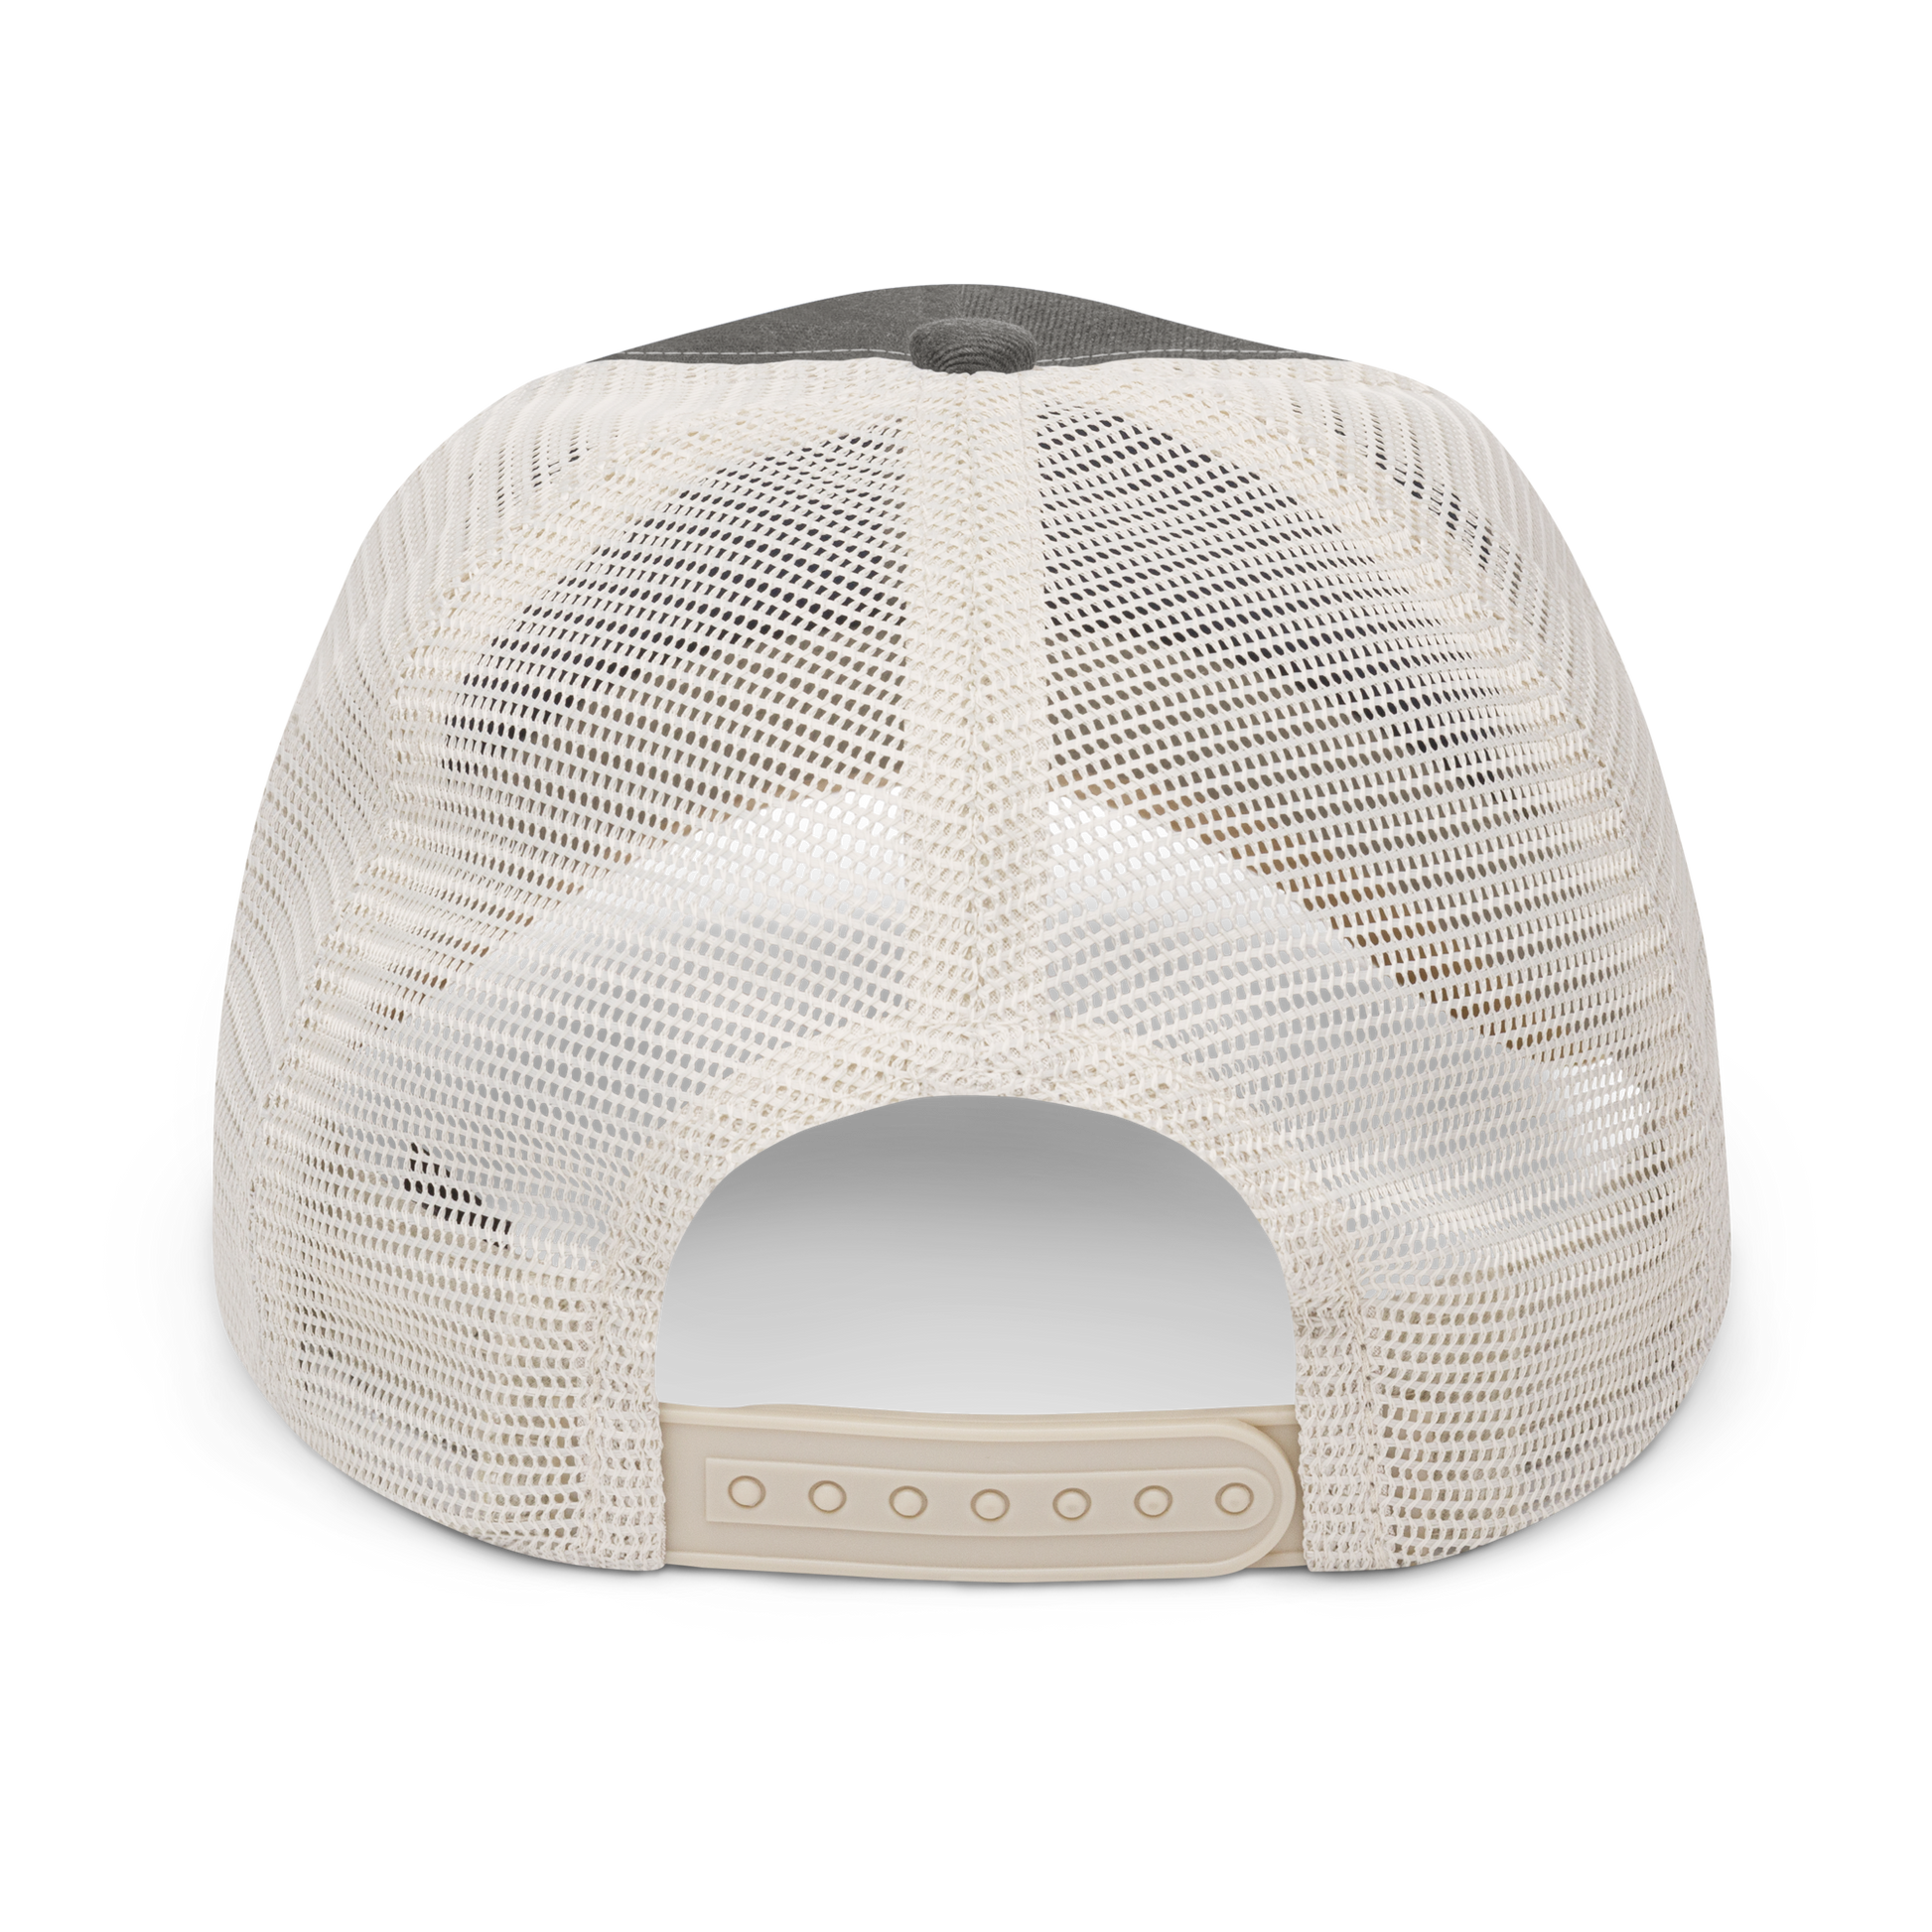 YHM Designs - YXU London Pigment-Dyed Trucker Cap - Crossed-X Design with Airport Code and Vintage Propliner - White Embroidery - Image 11